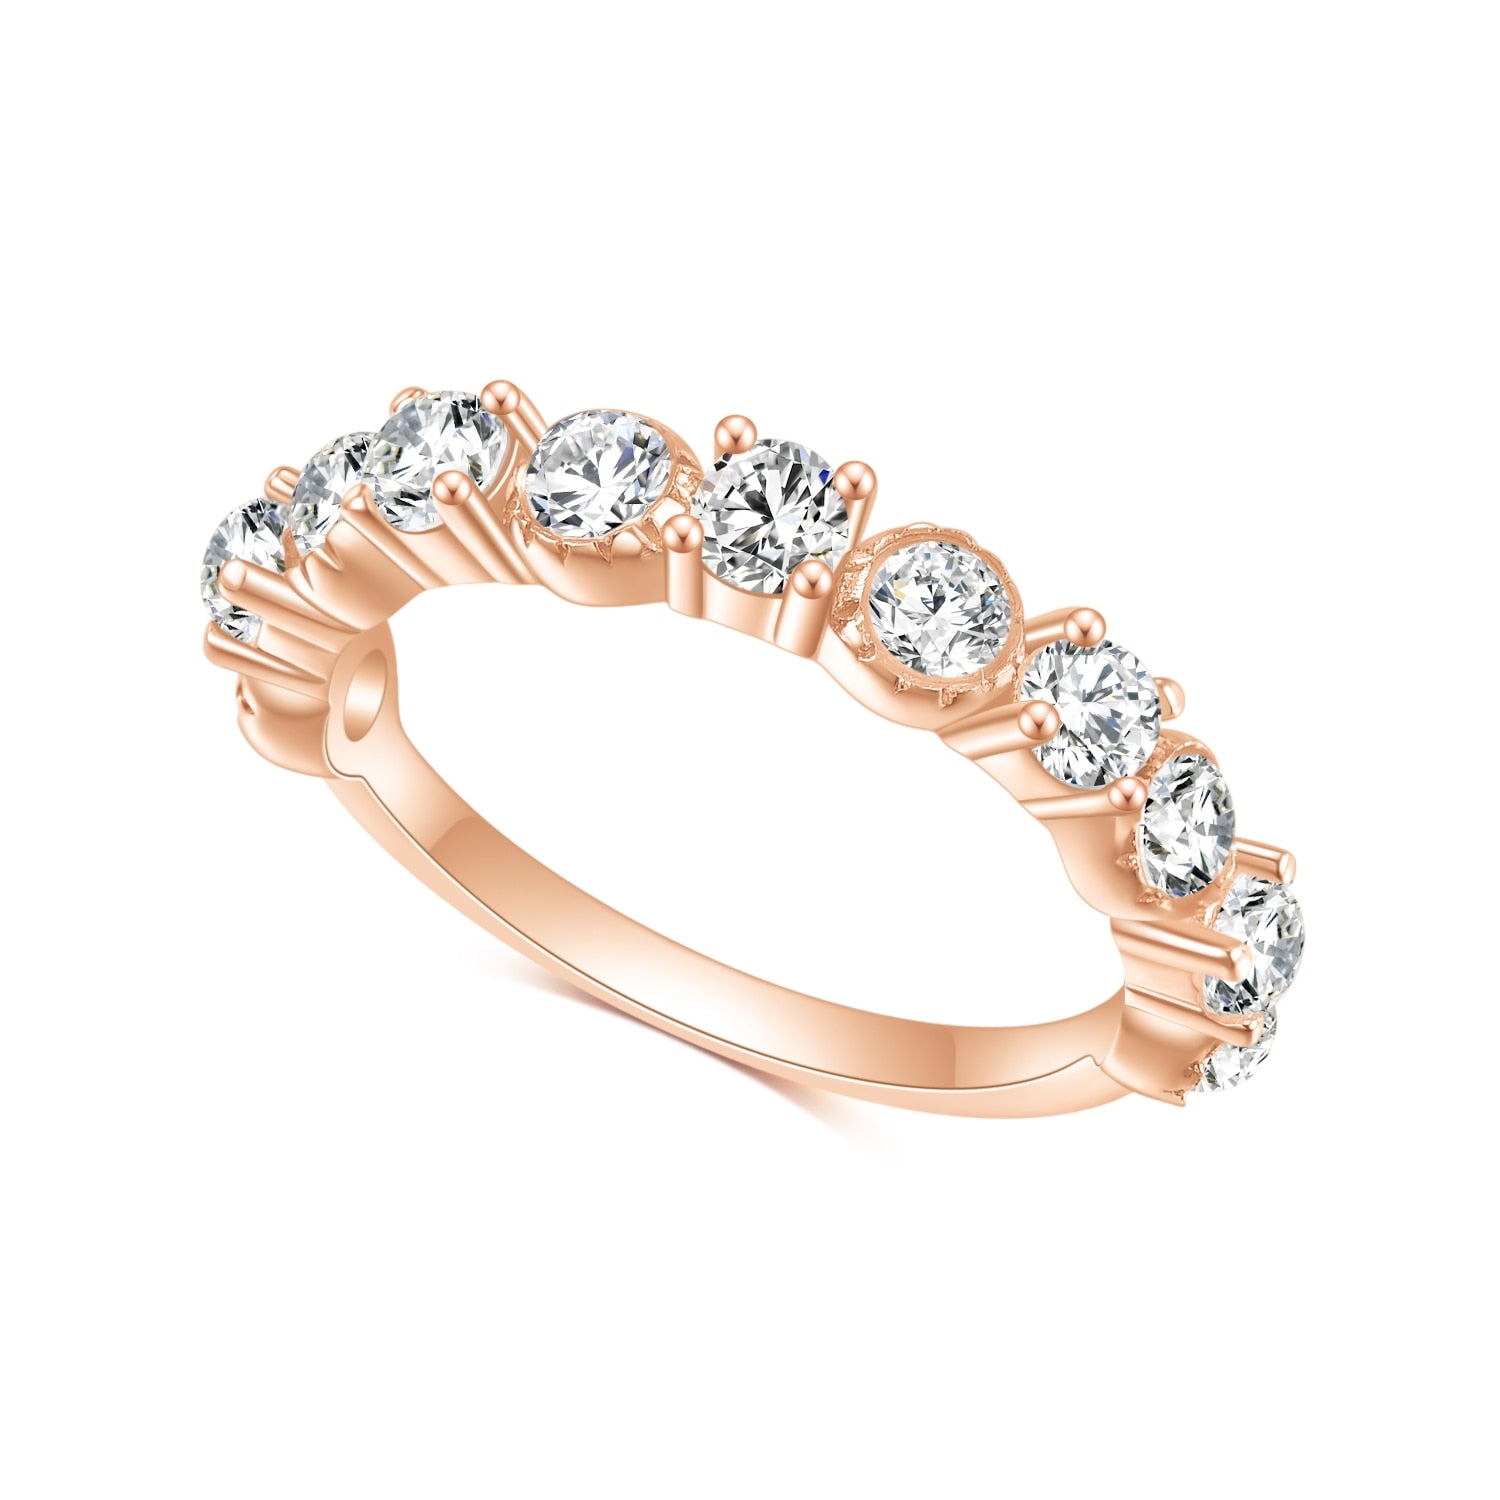 A rose gold wedding ring set with round moissanites, alternating between prong and bezel set.